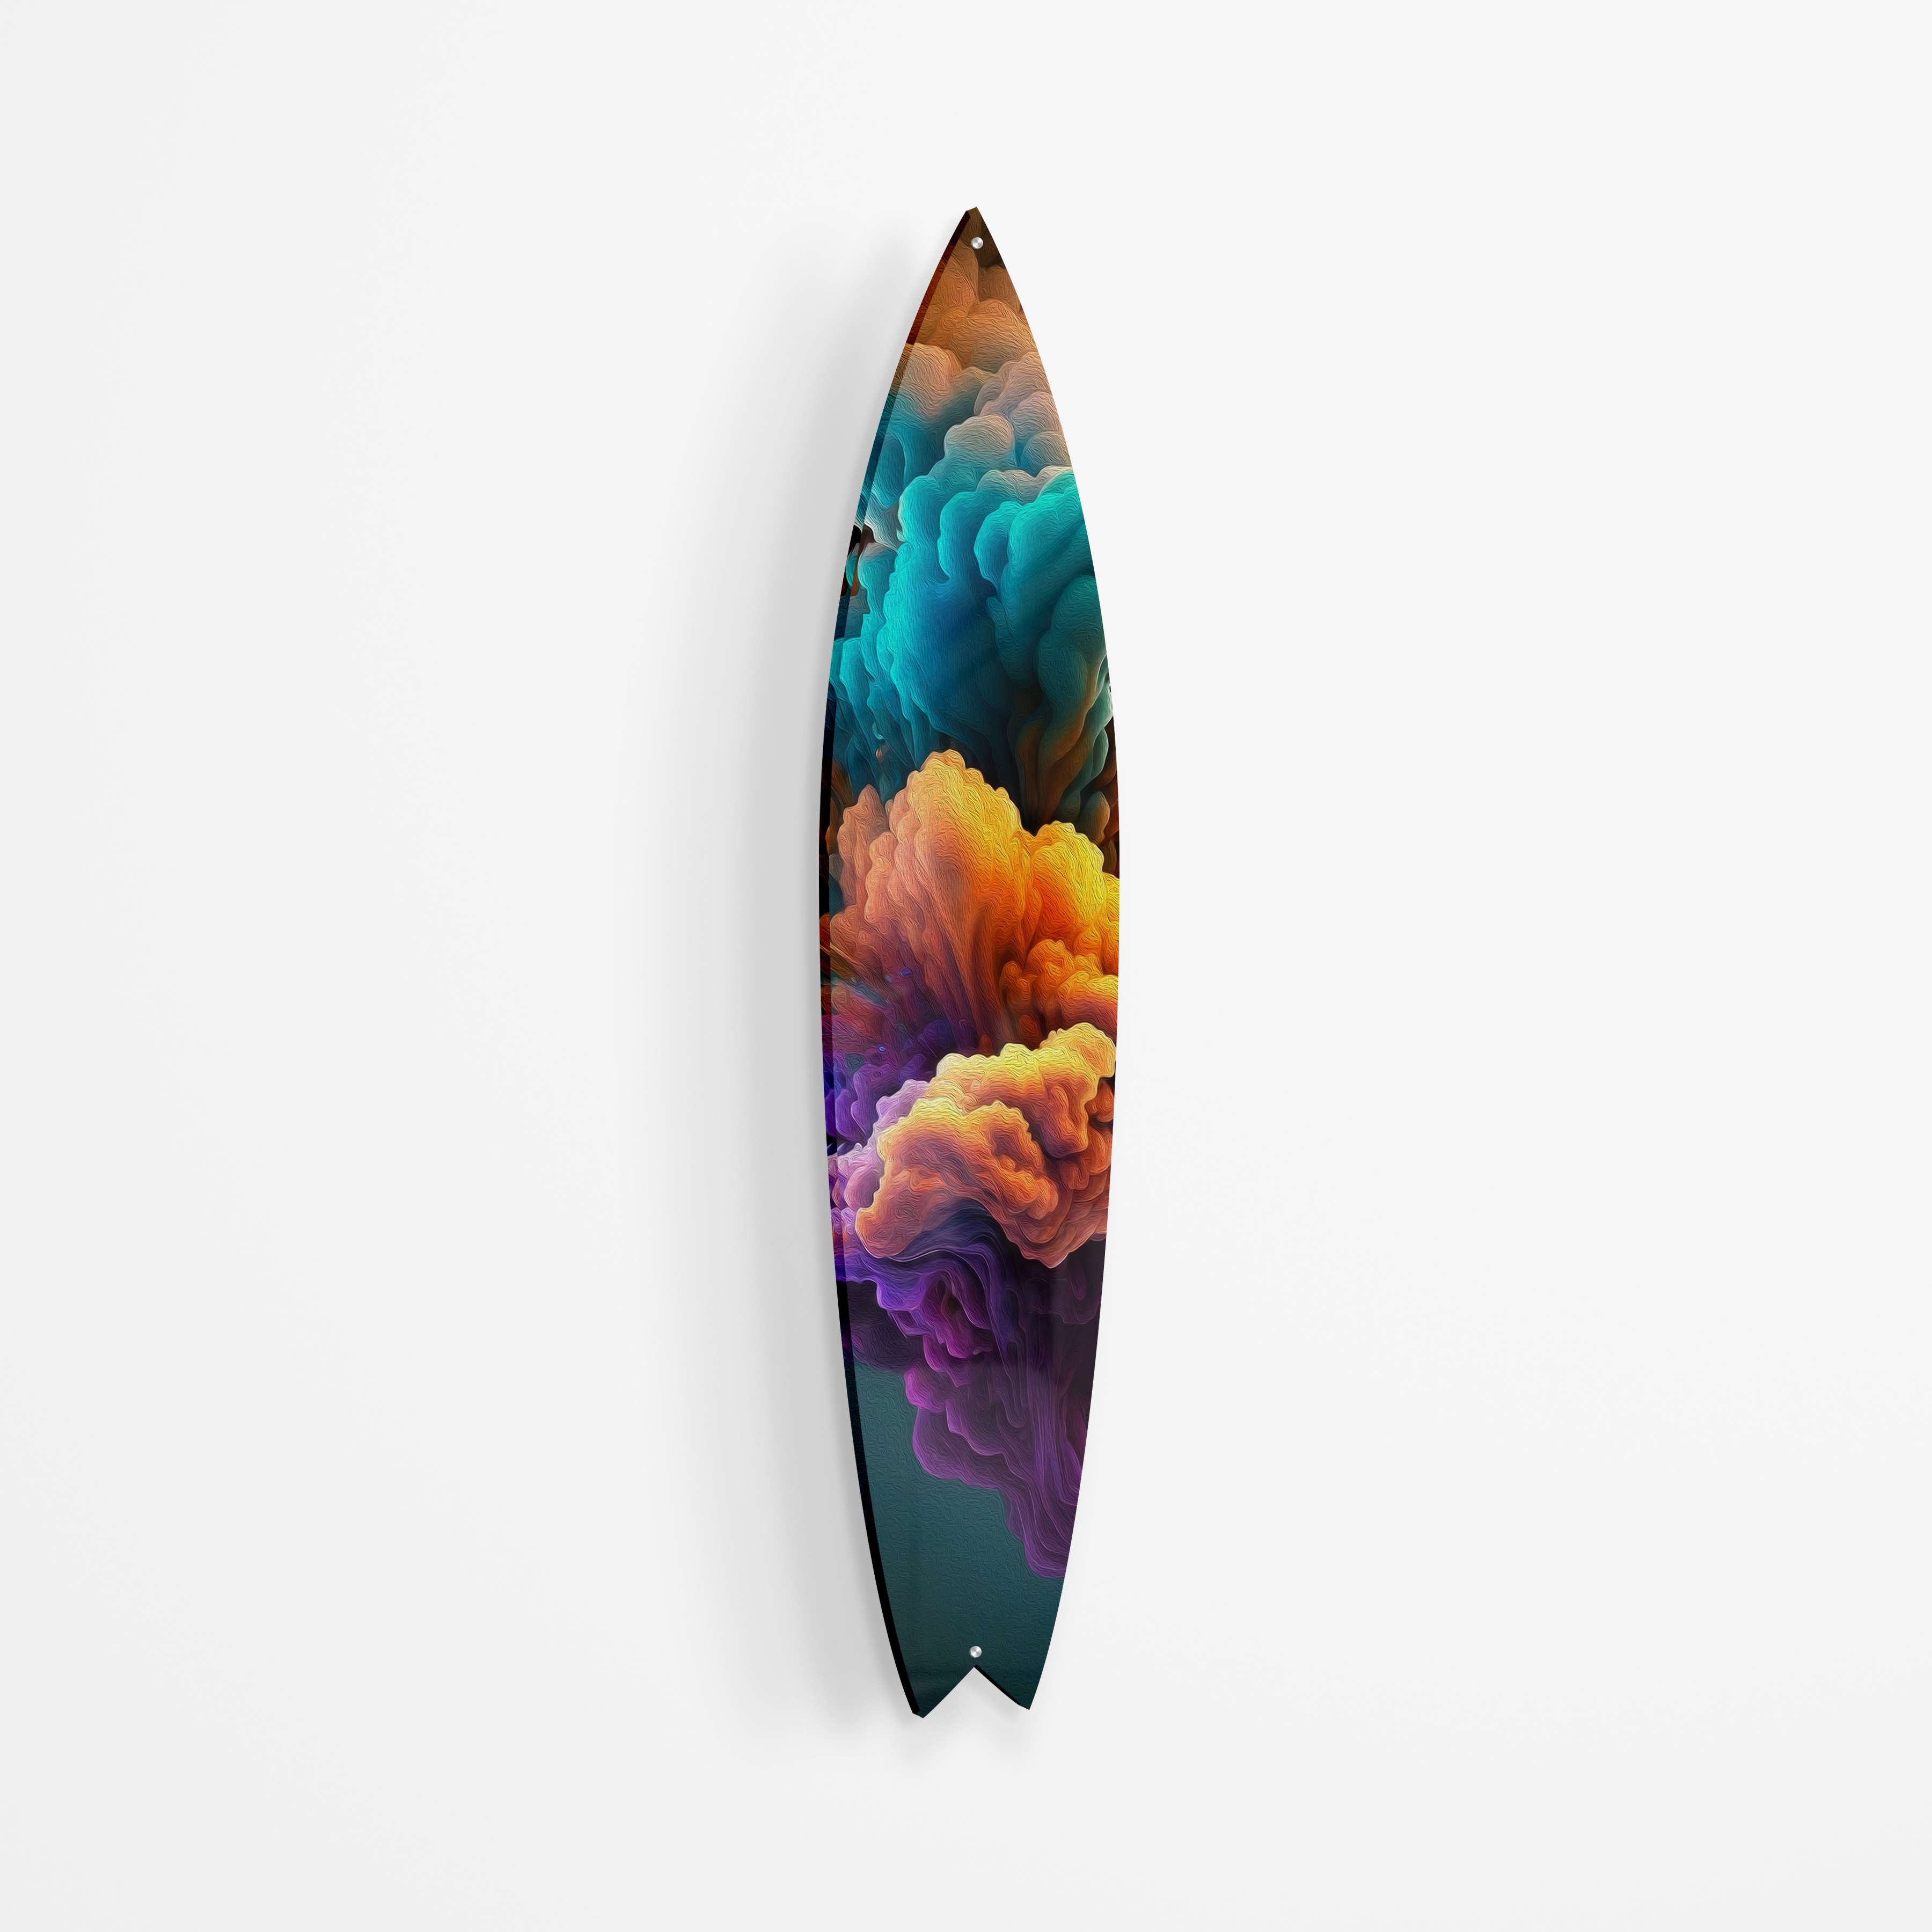 Abstract Space Smoke Acrylic Surfboard Wall Art buy at the best